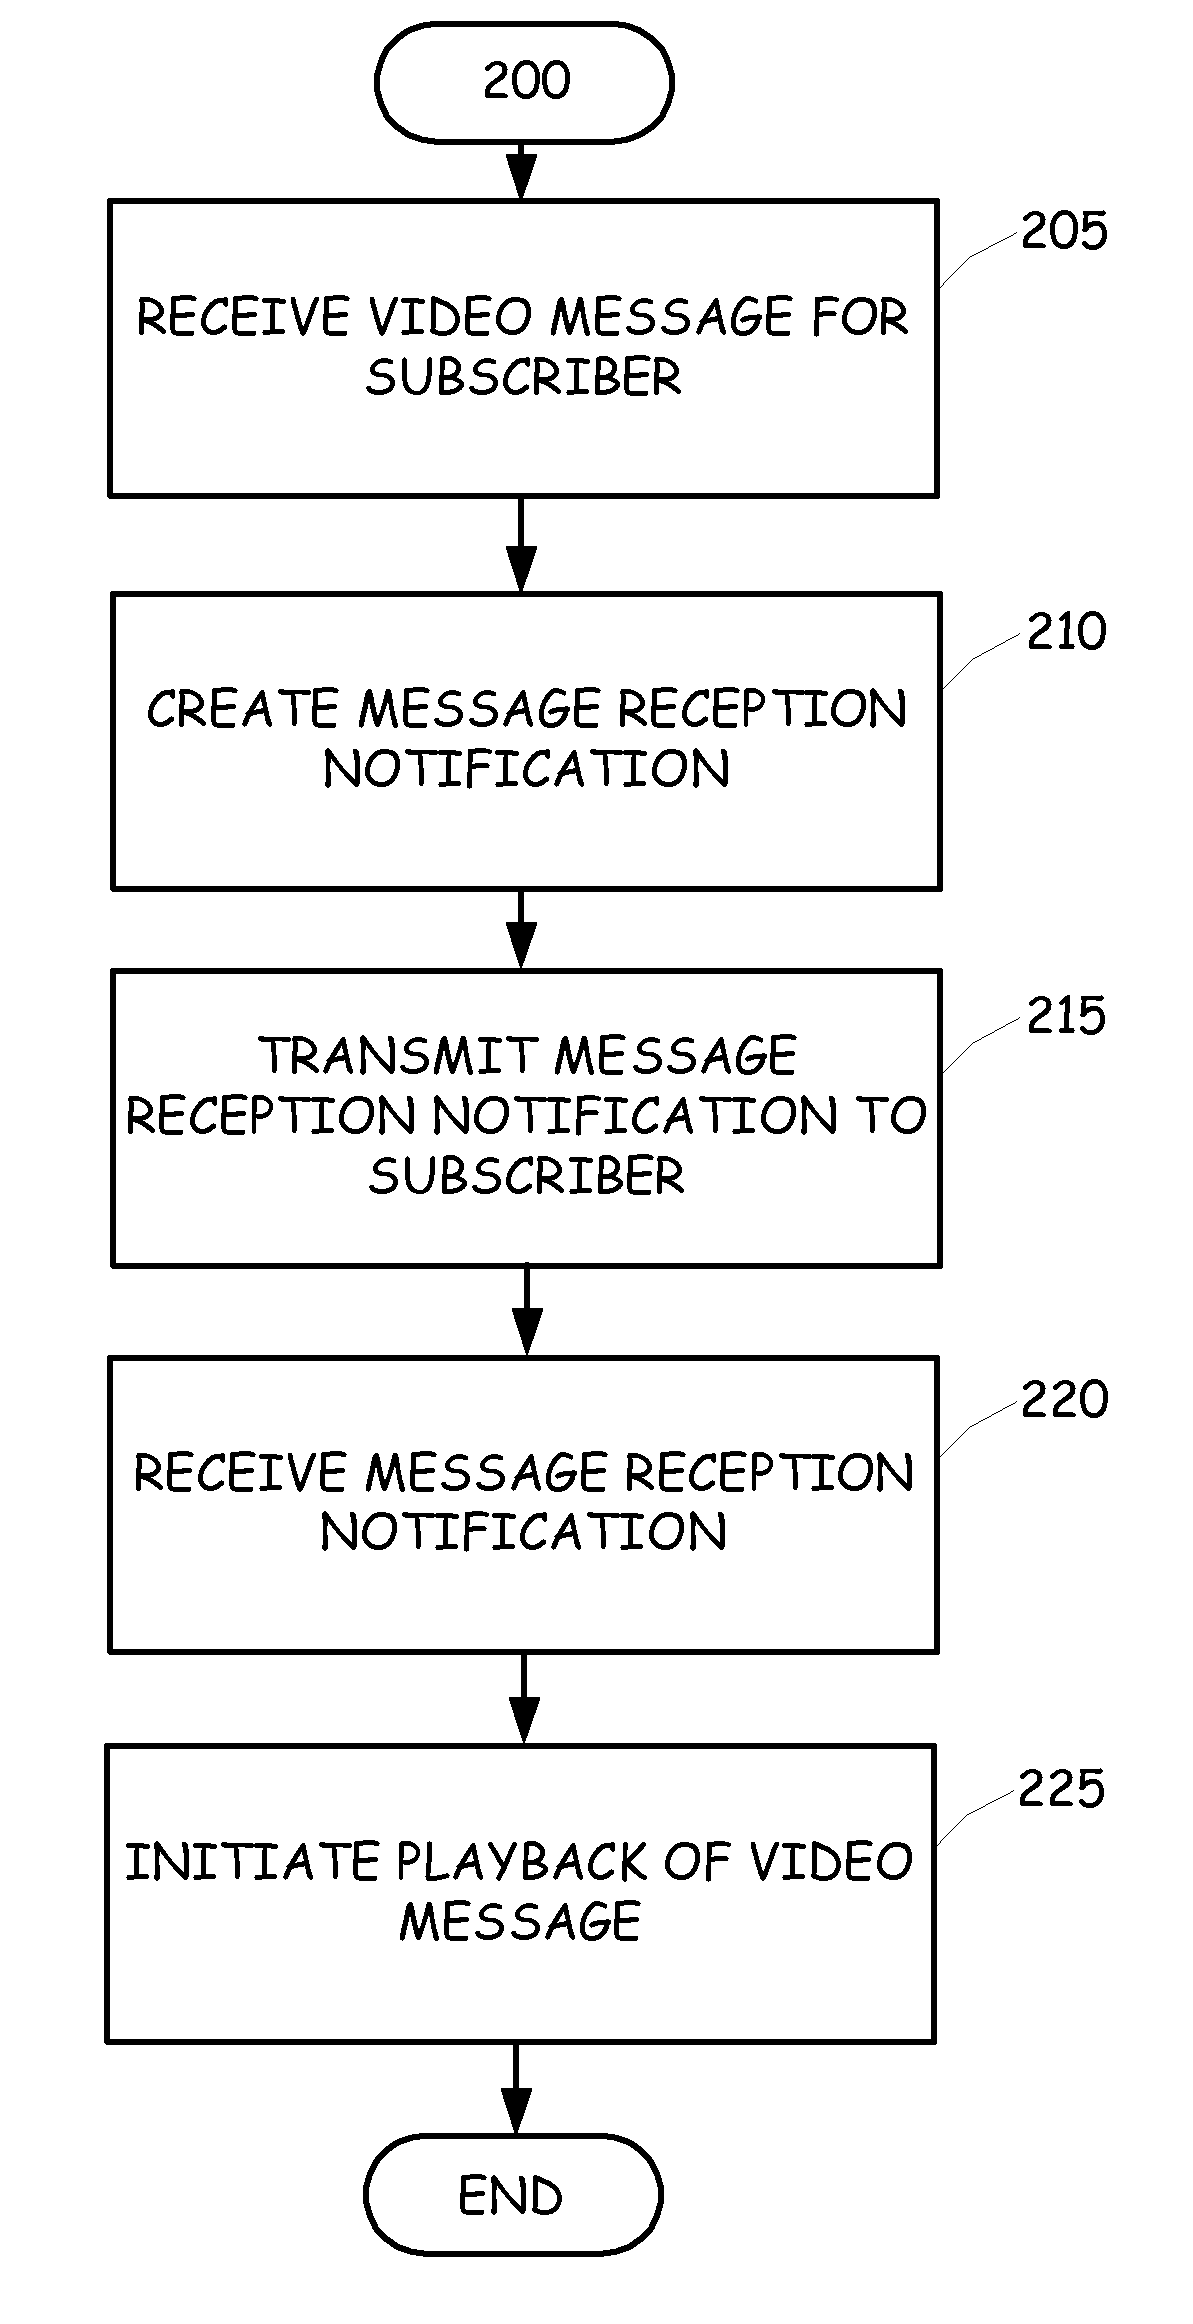 Delivery of video mail and video mail receipt notifications